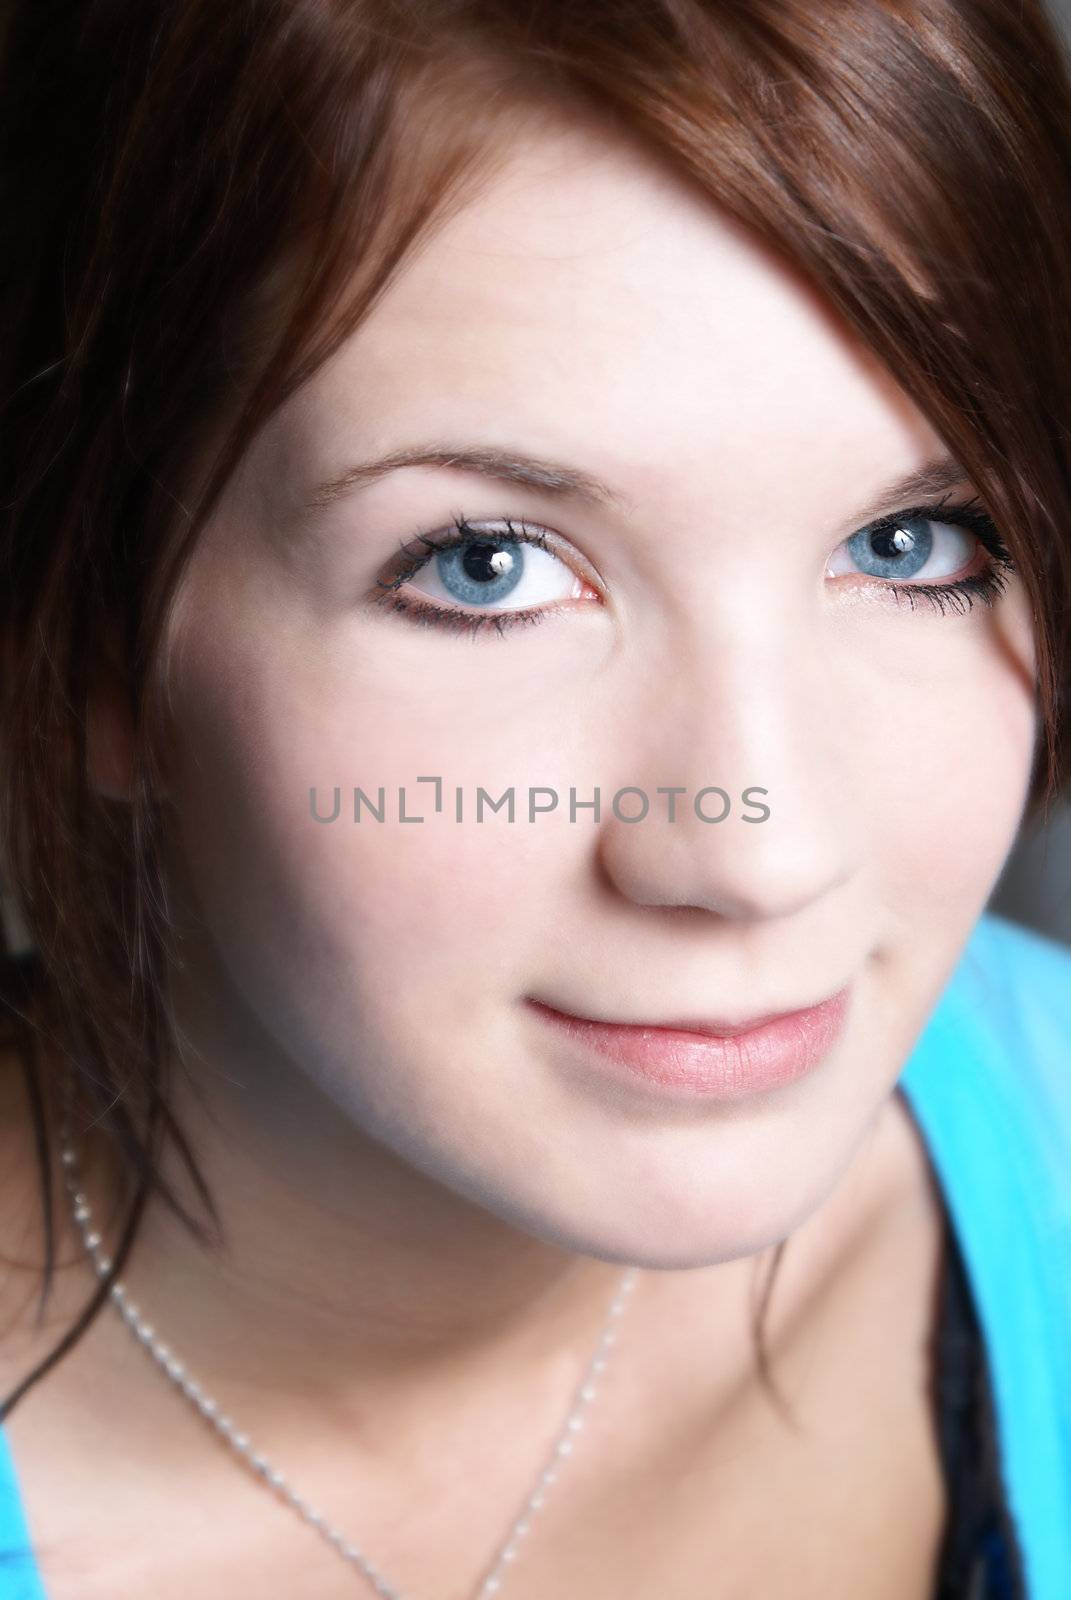 A closeup portrait of a young girl with big blue eyes.